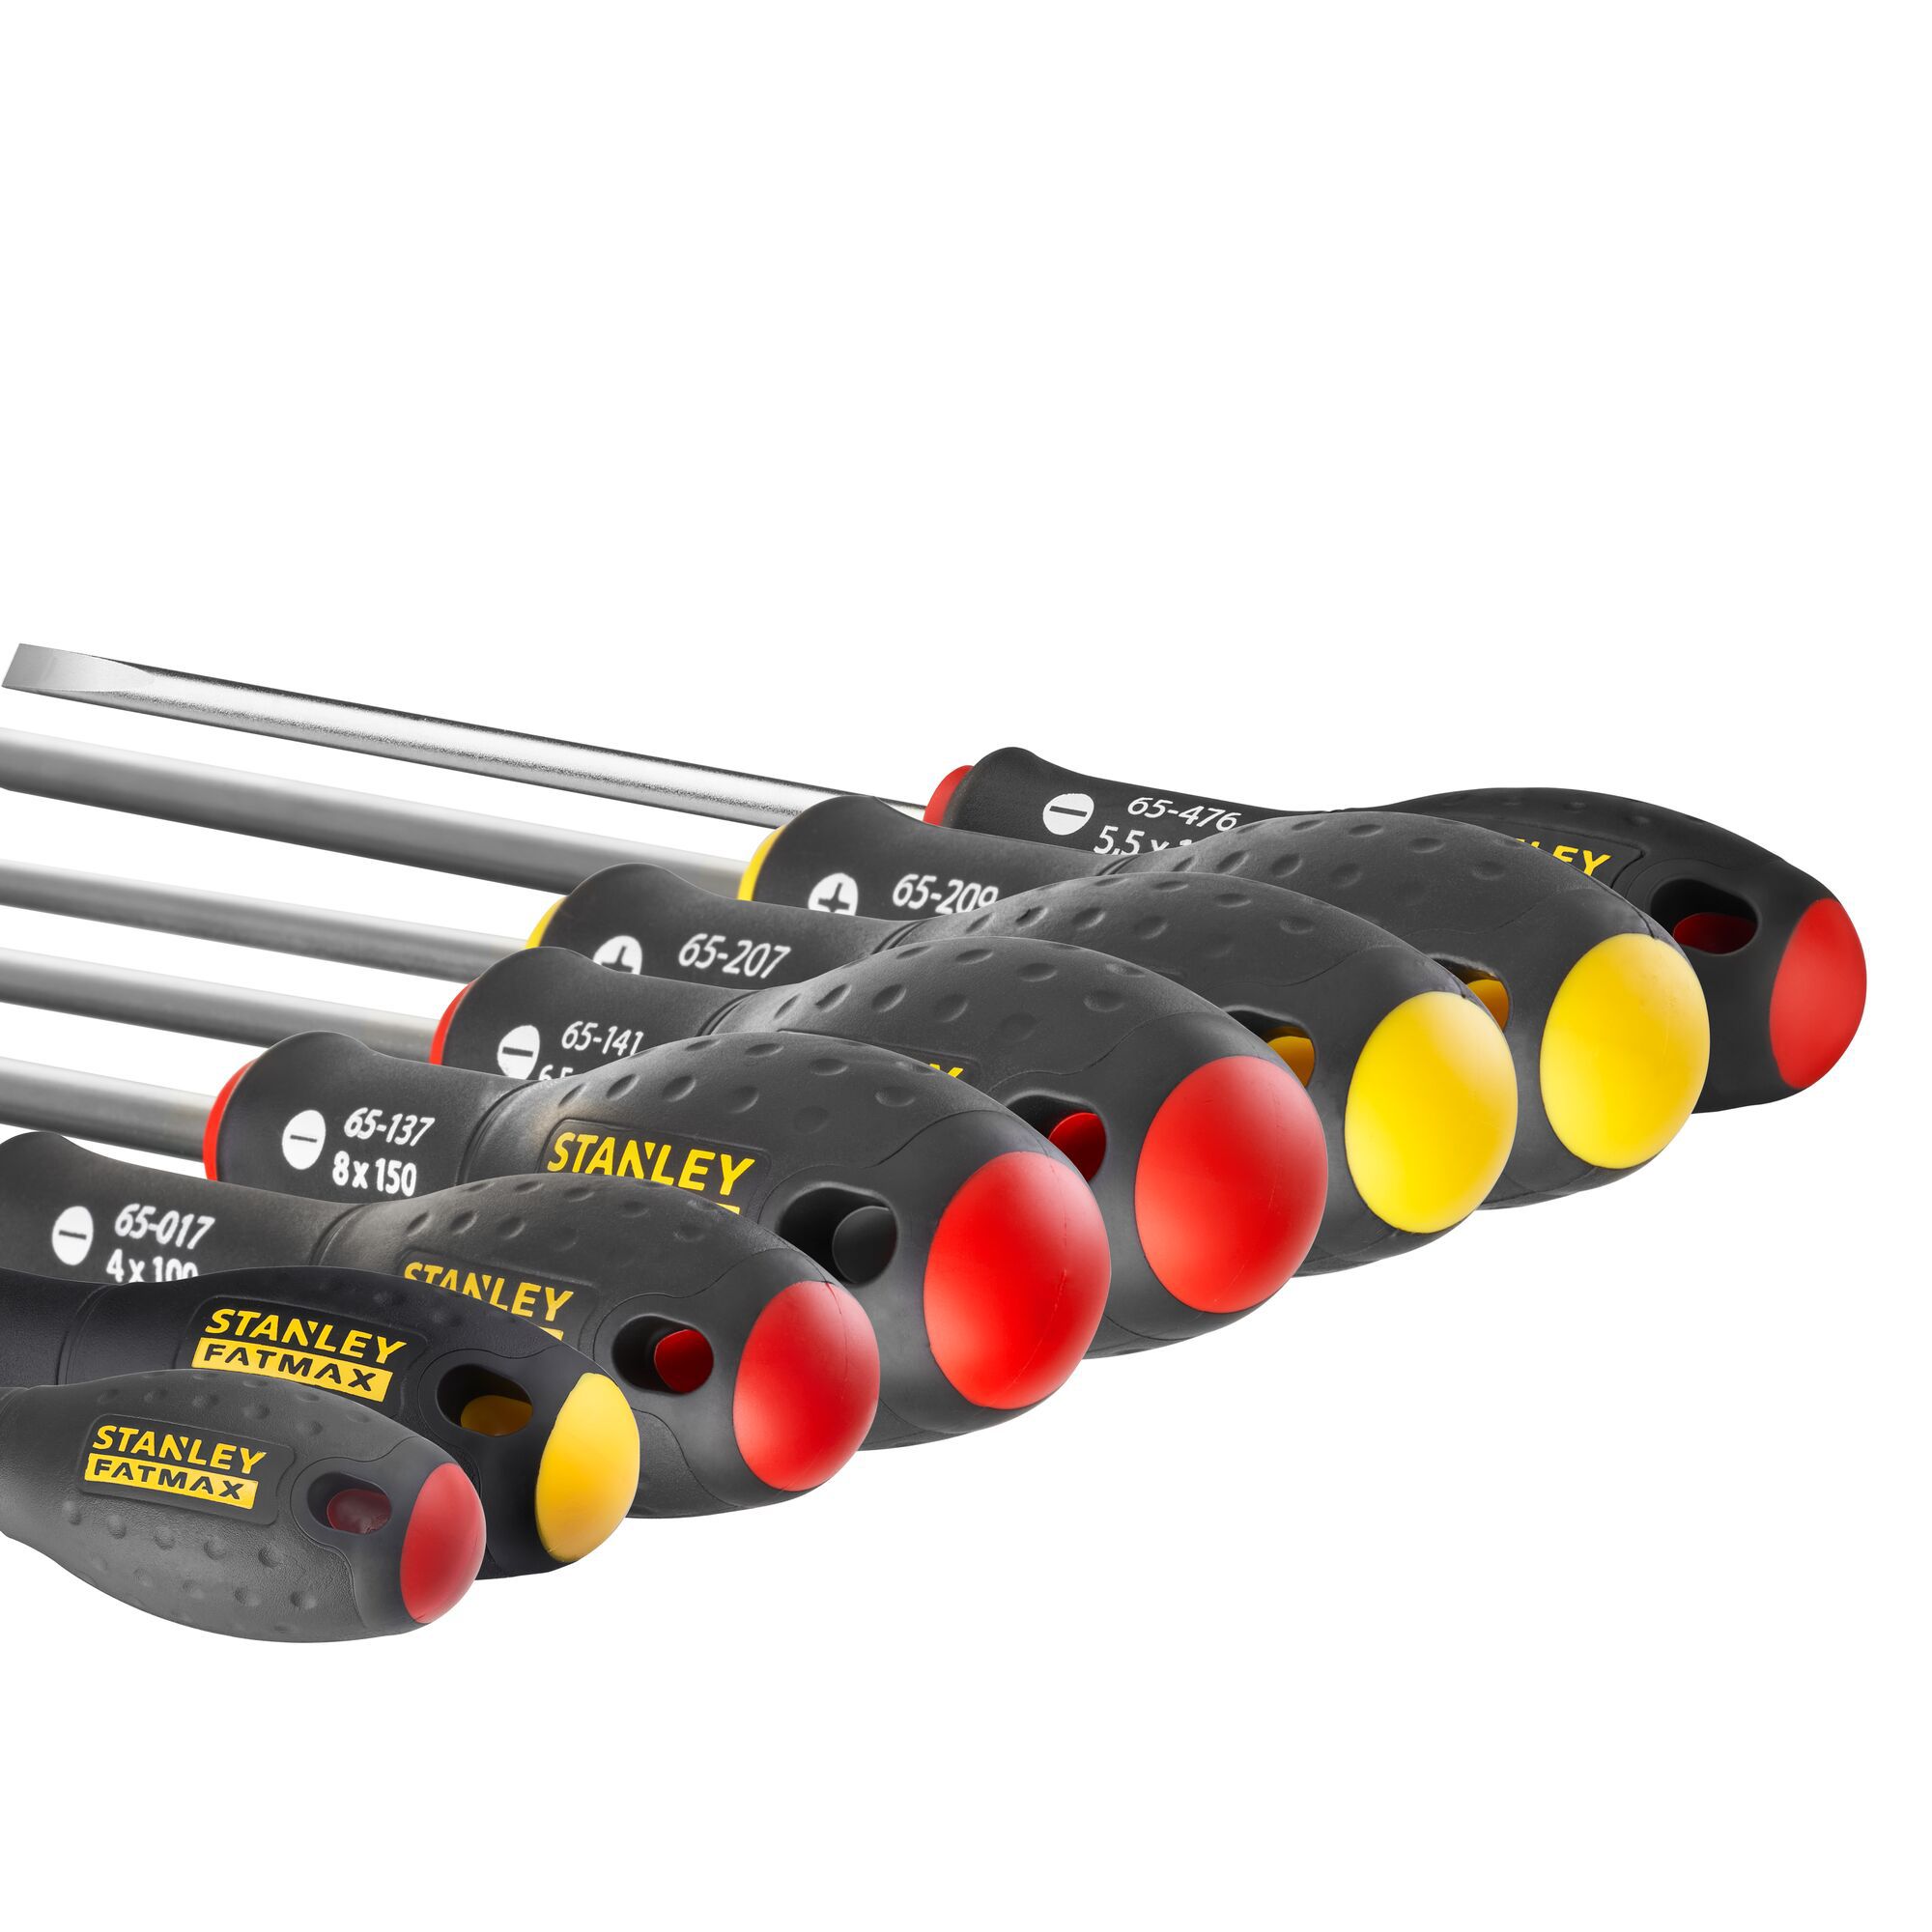 Stanley FatMax 8 piece Precision Slotted Screwdriver set